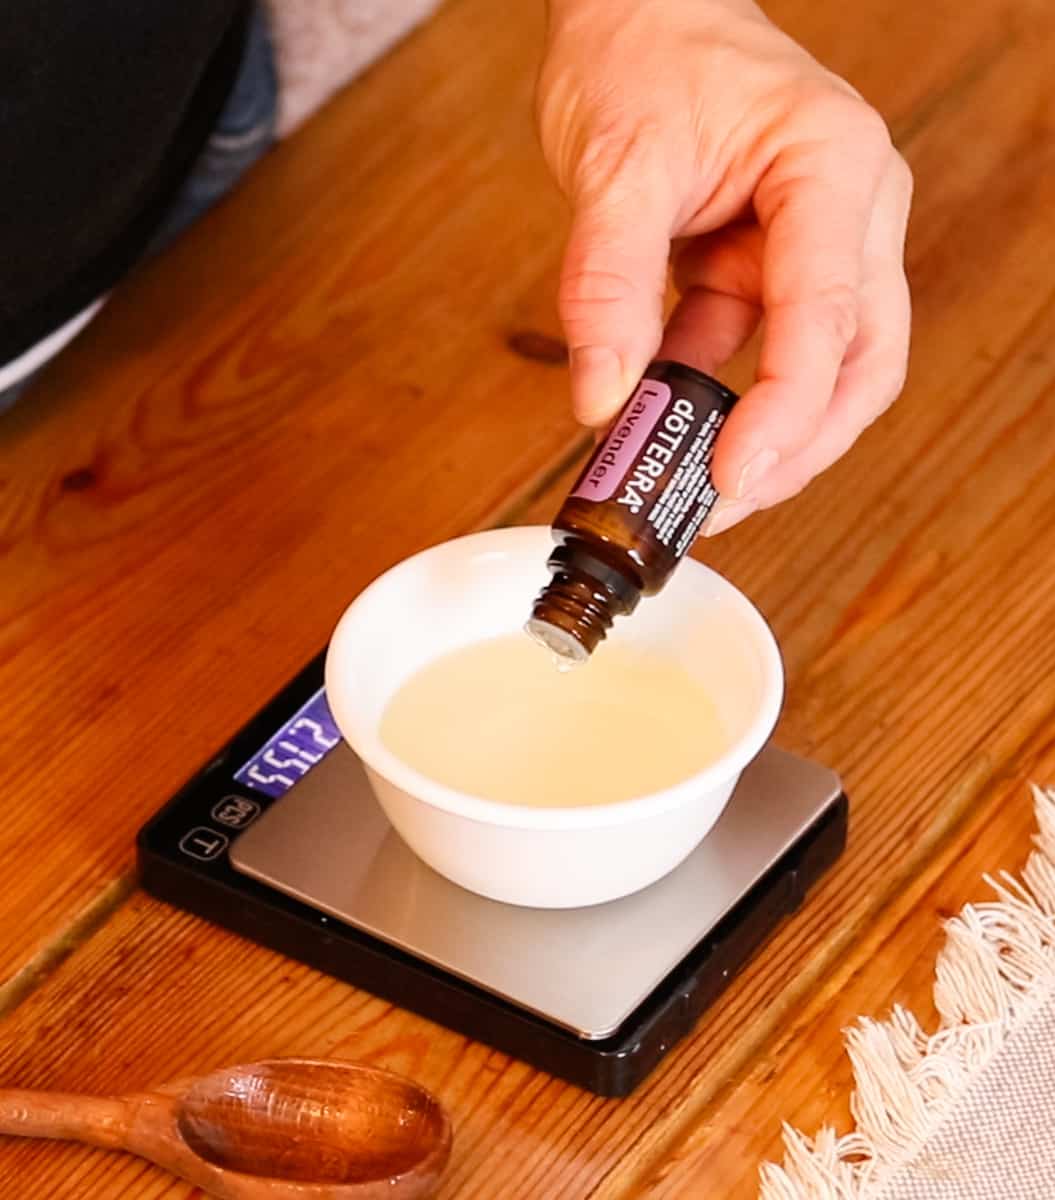 Pouring drops of lavender essential oil into a small bowl containing a mixture of vegetable glycerin and castile soap. The bowl is sitting on a digital scale.